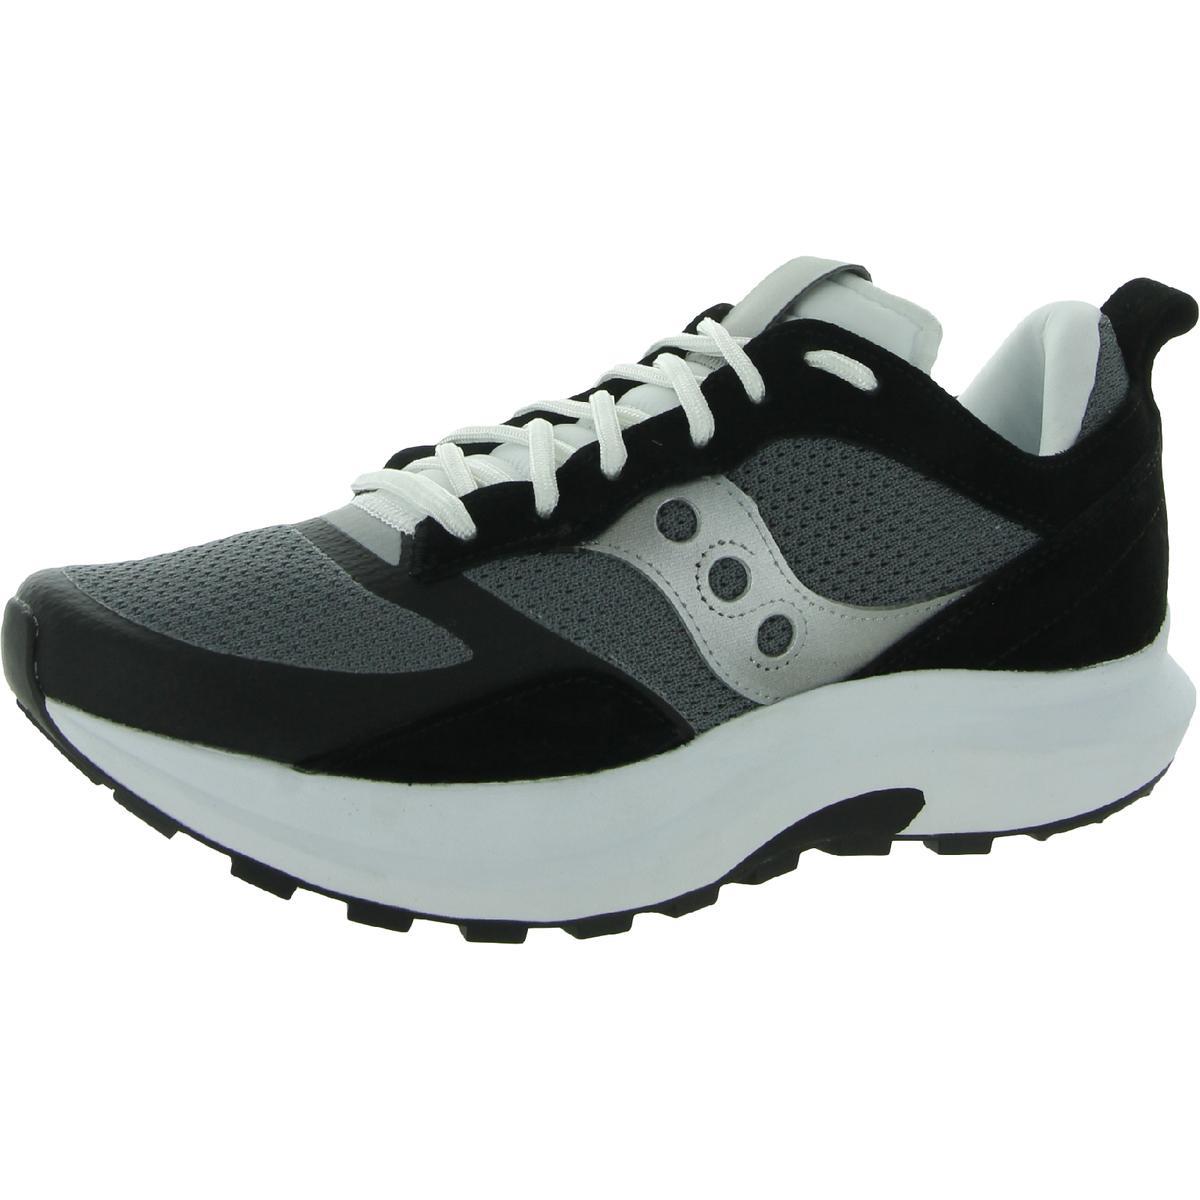 Saucony Men`s Jazz Hybrid Leather Lace-up Athletic Fashion Sneakers Black/Silver